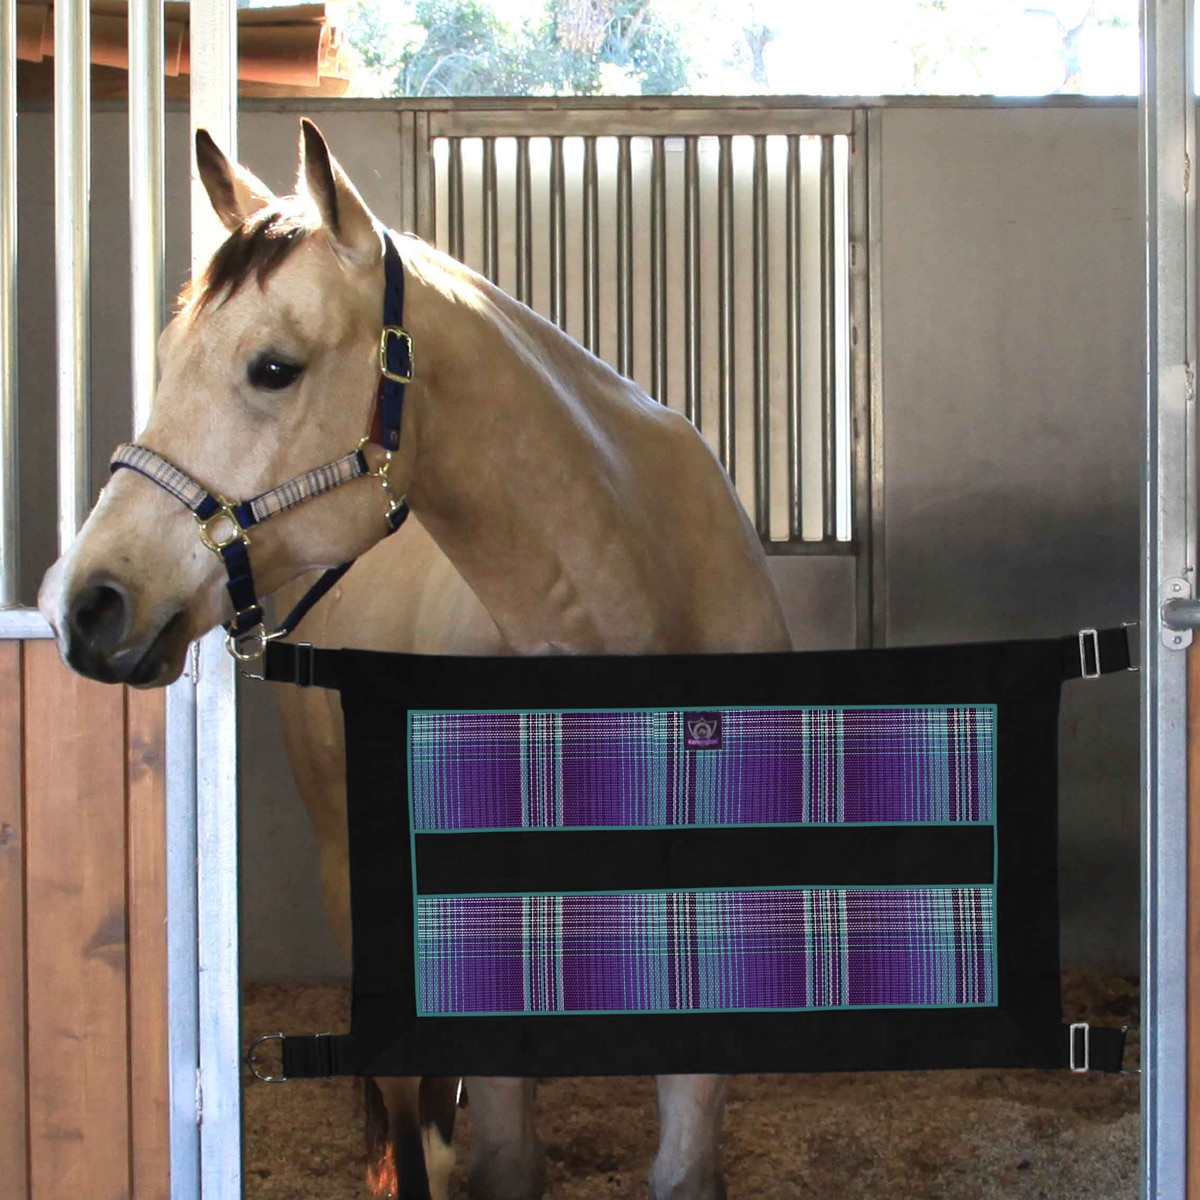 Kensington Door Guard for Horses — Designed to Keep Horse Securely in Stall in Style — Adjustable Straps and Hardware Included